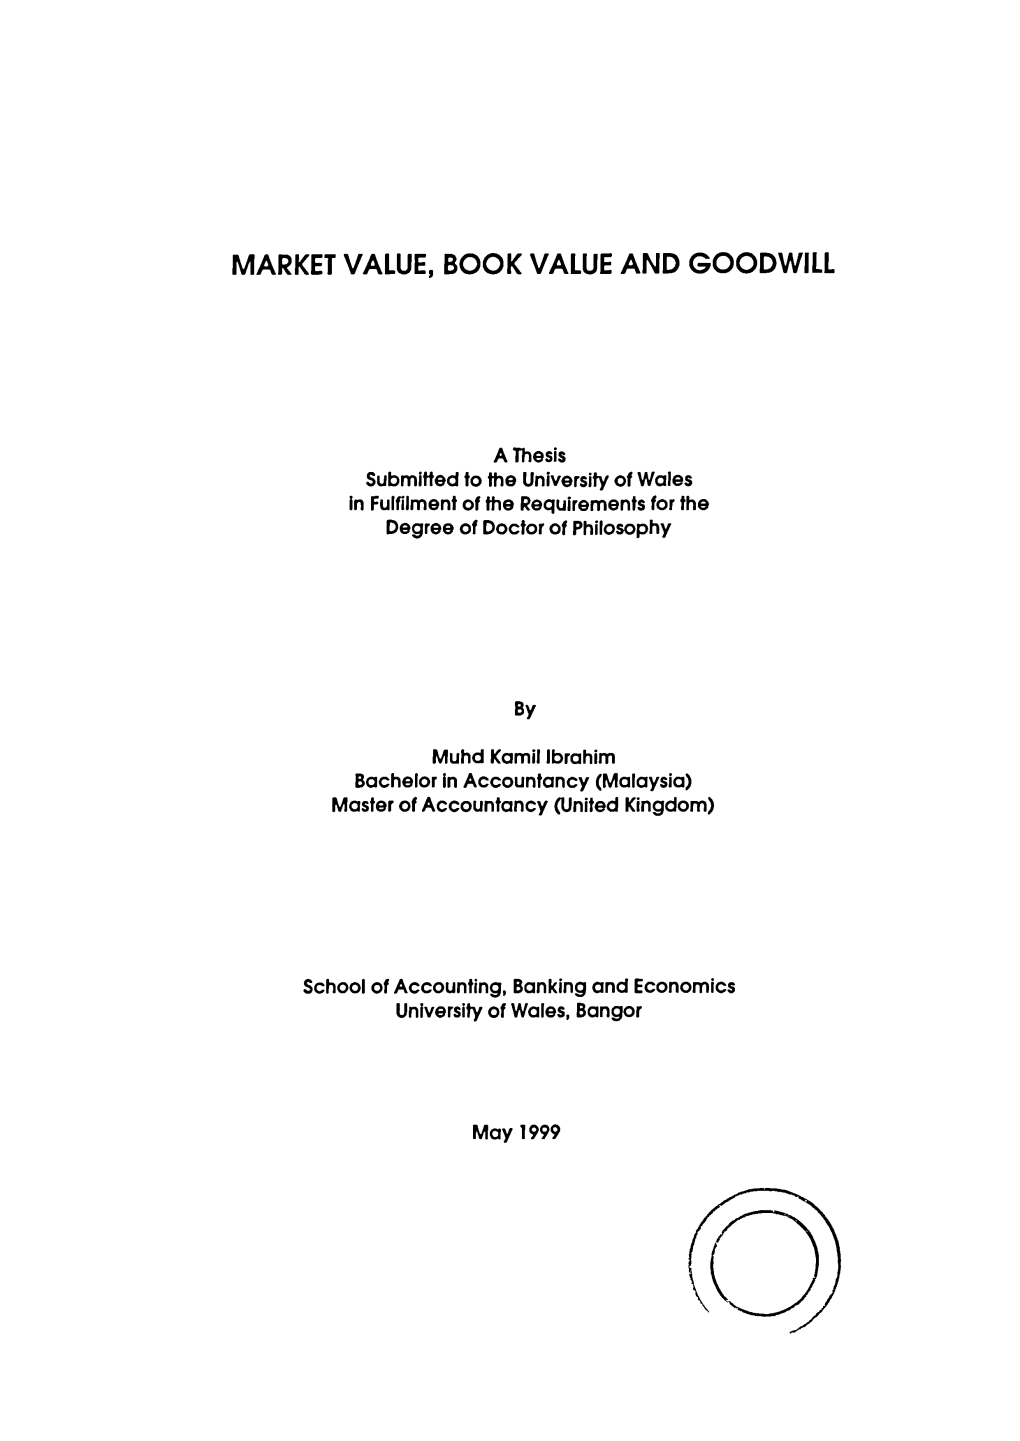 Market Value, Book Value and Goodwill